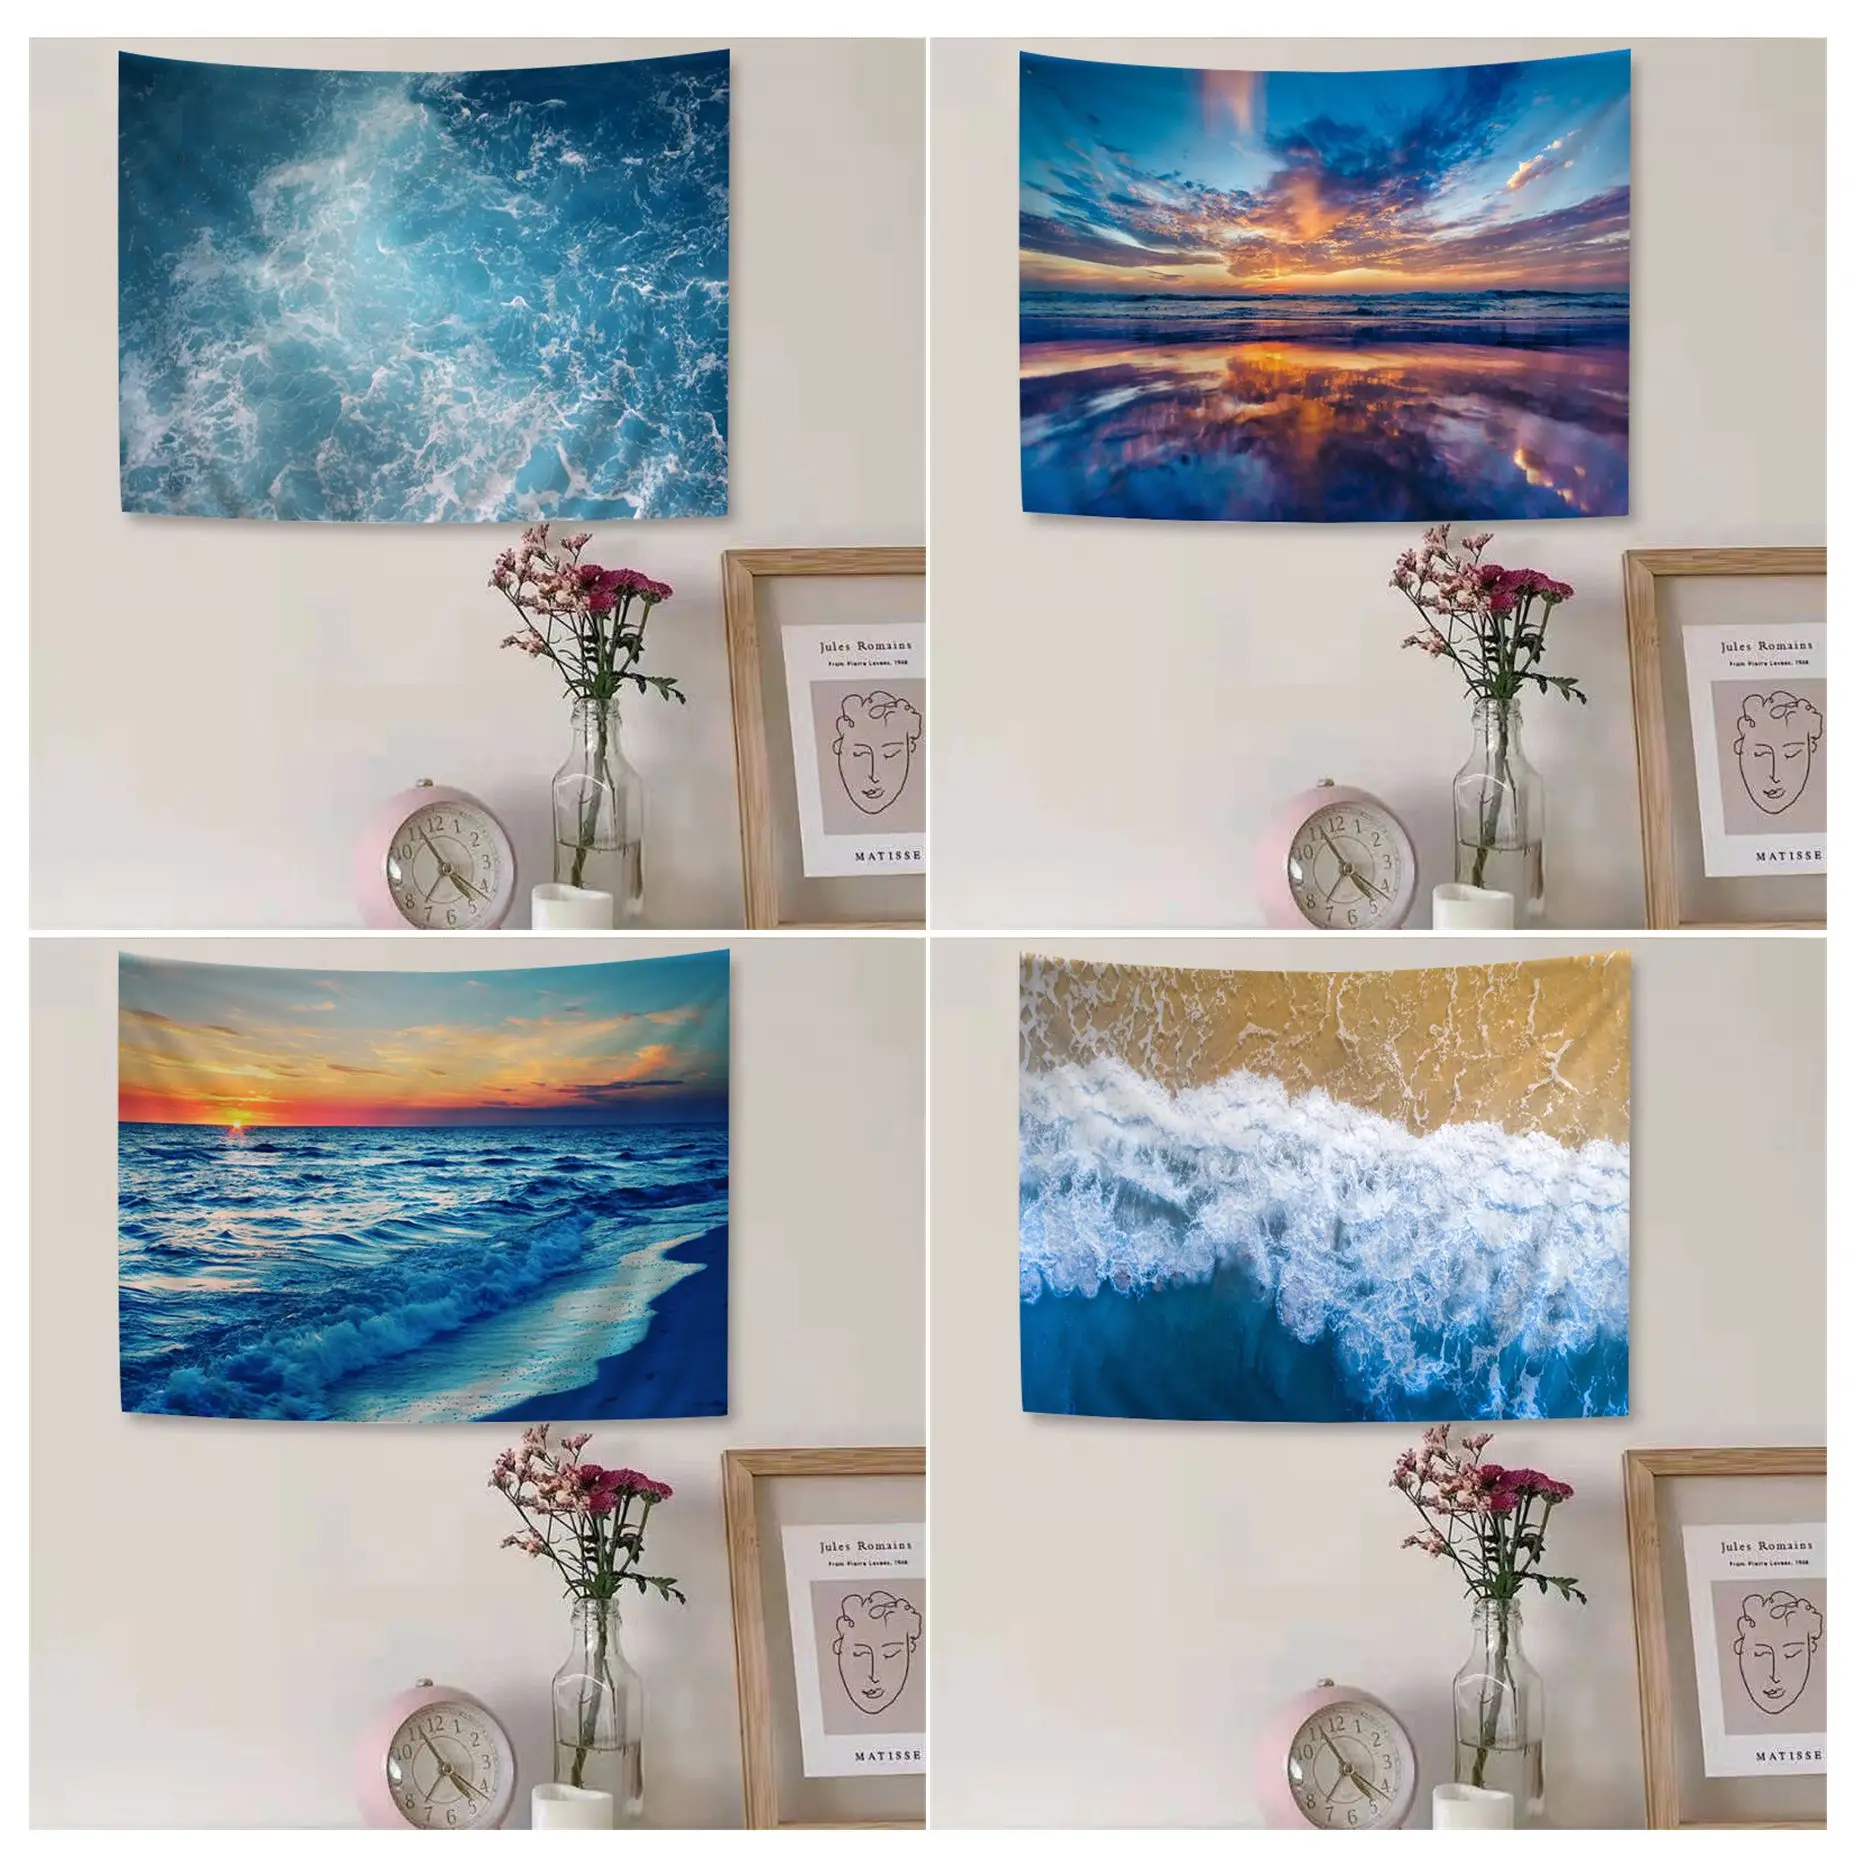 

Blue Ocean Wave Sunset Cloud Wall Tapestry Hanging Tarot Hippie Wall Rugs Dorm Wall Hanging Sheets